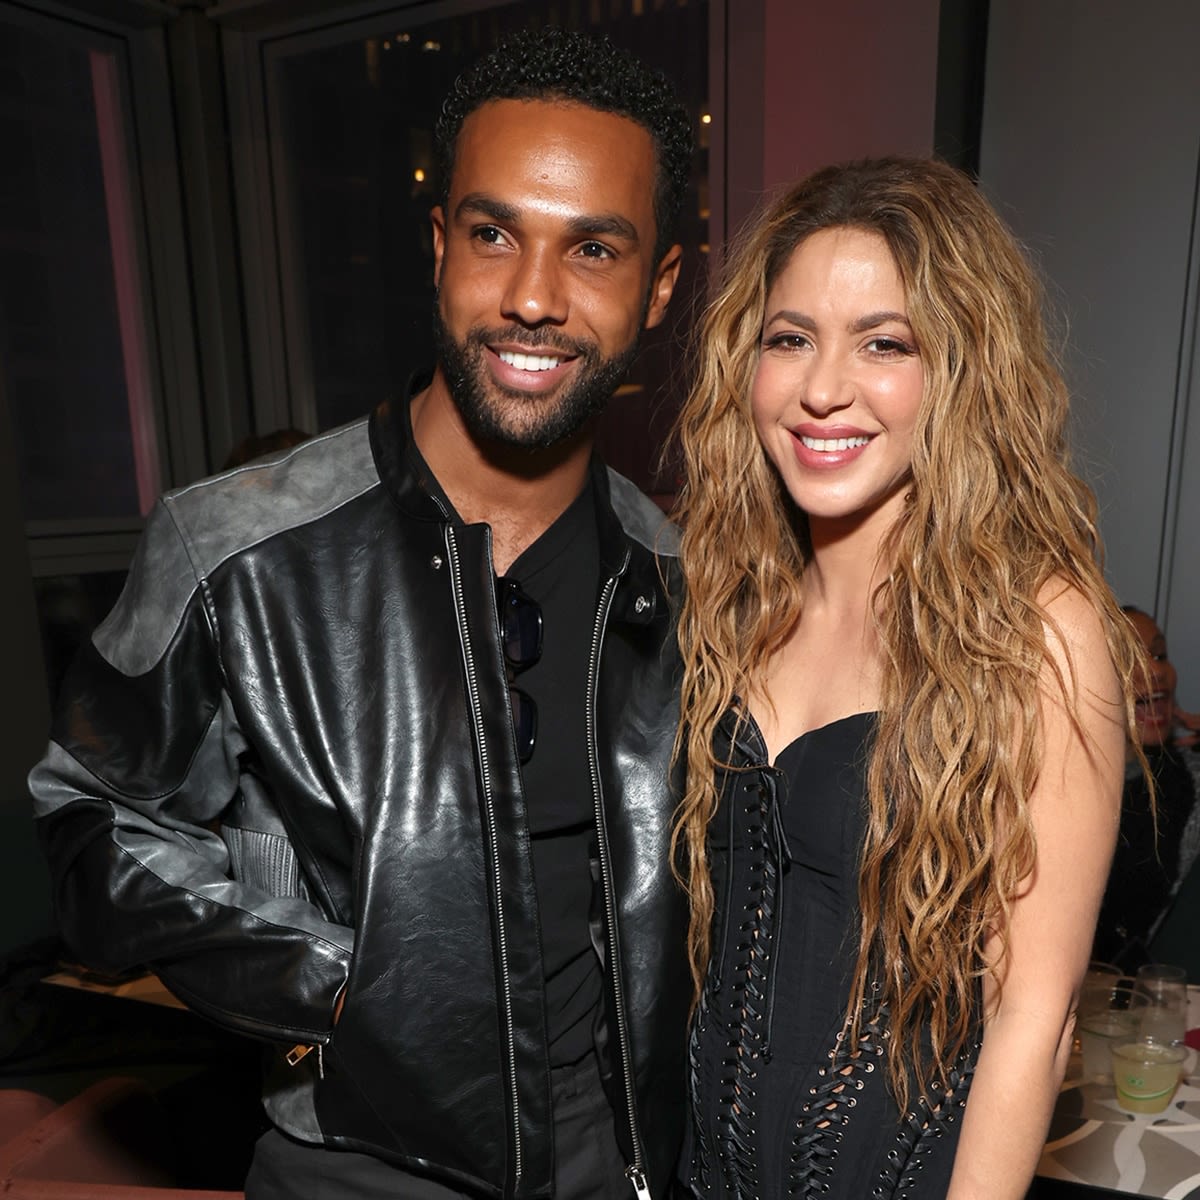 Emily in Paris ' Lucien Laviscount Details Working With Shakira